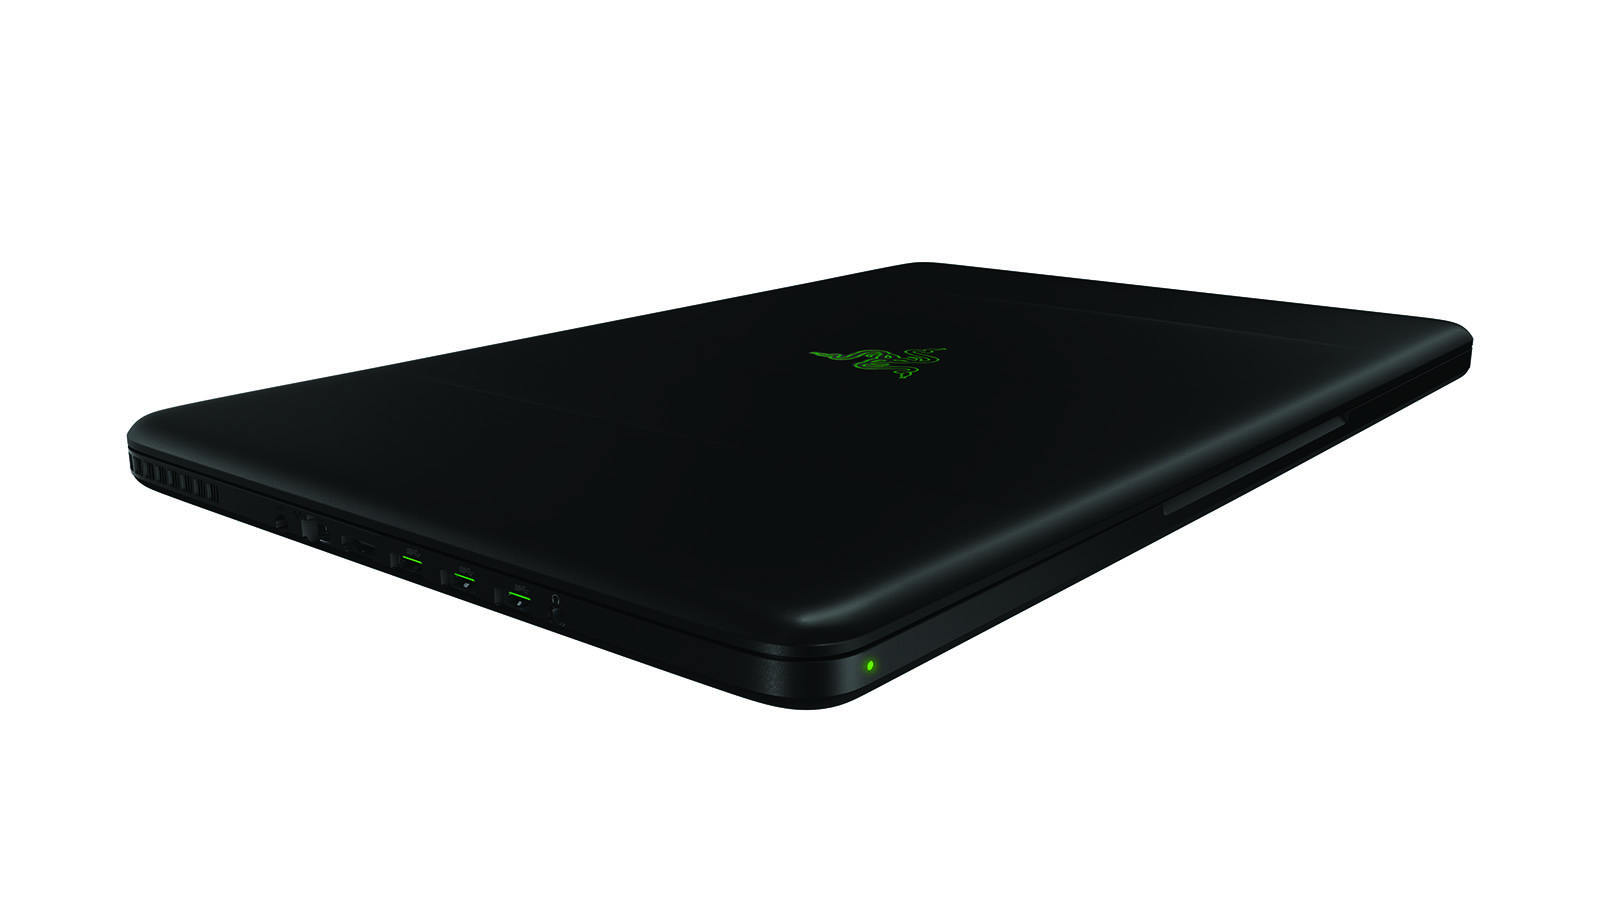 Razer Unveils The New Blade Gaming Notebook At Pax Prime